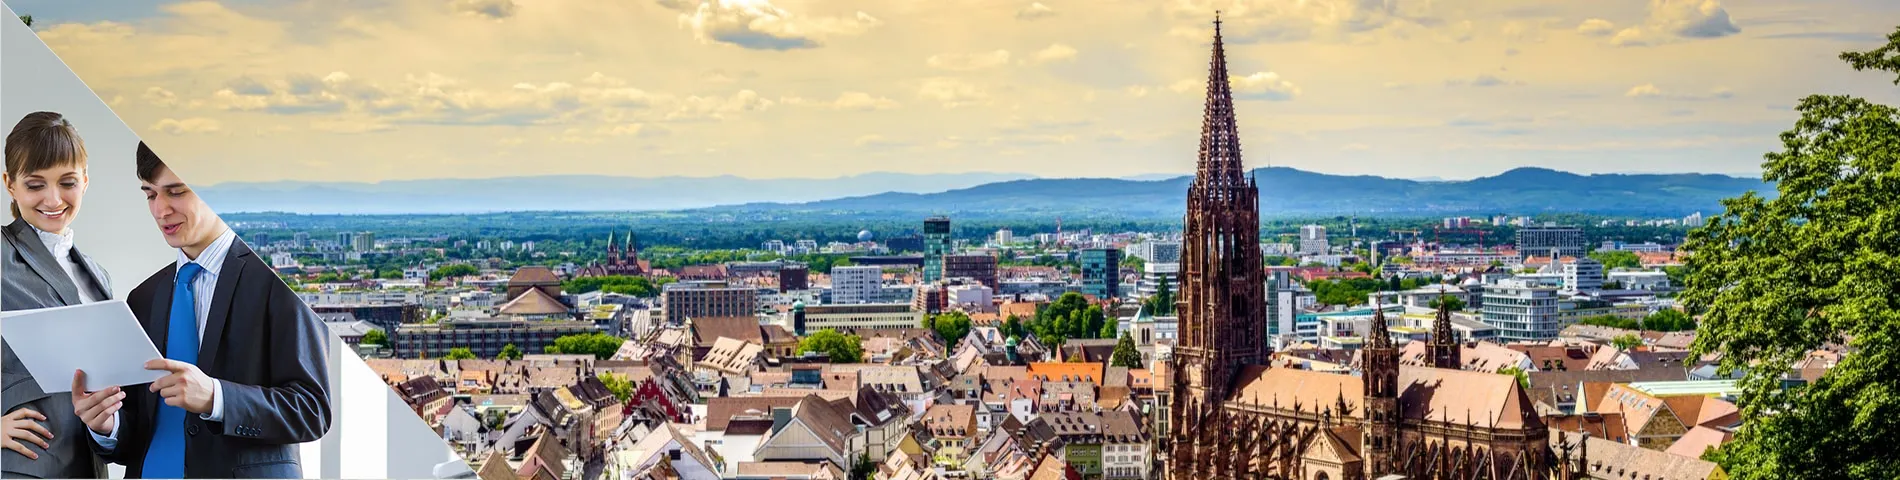 Freiburg - Business One-to-One